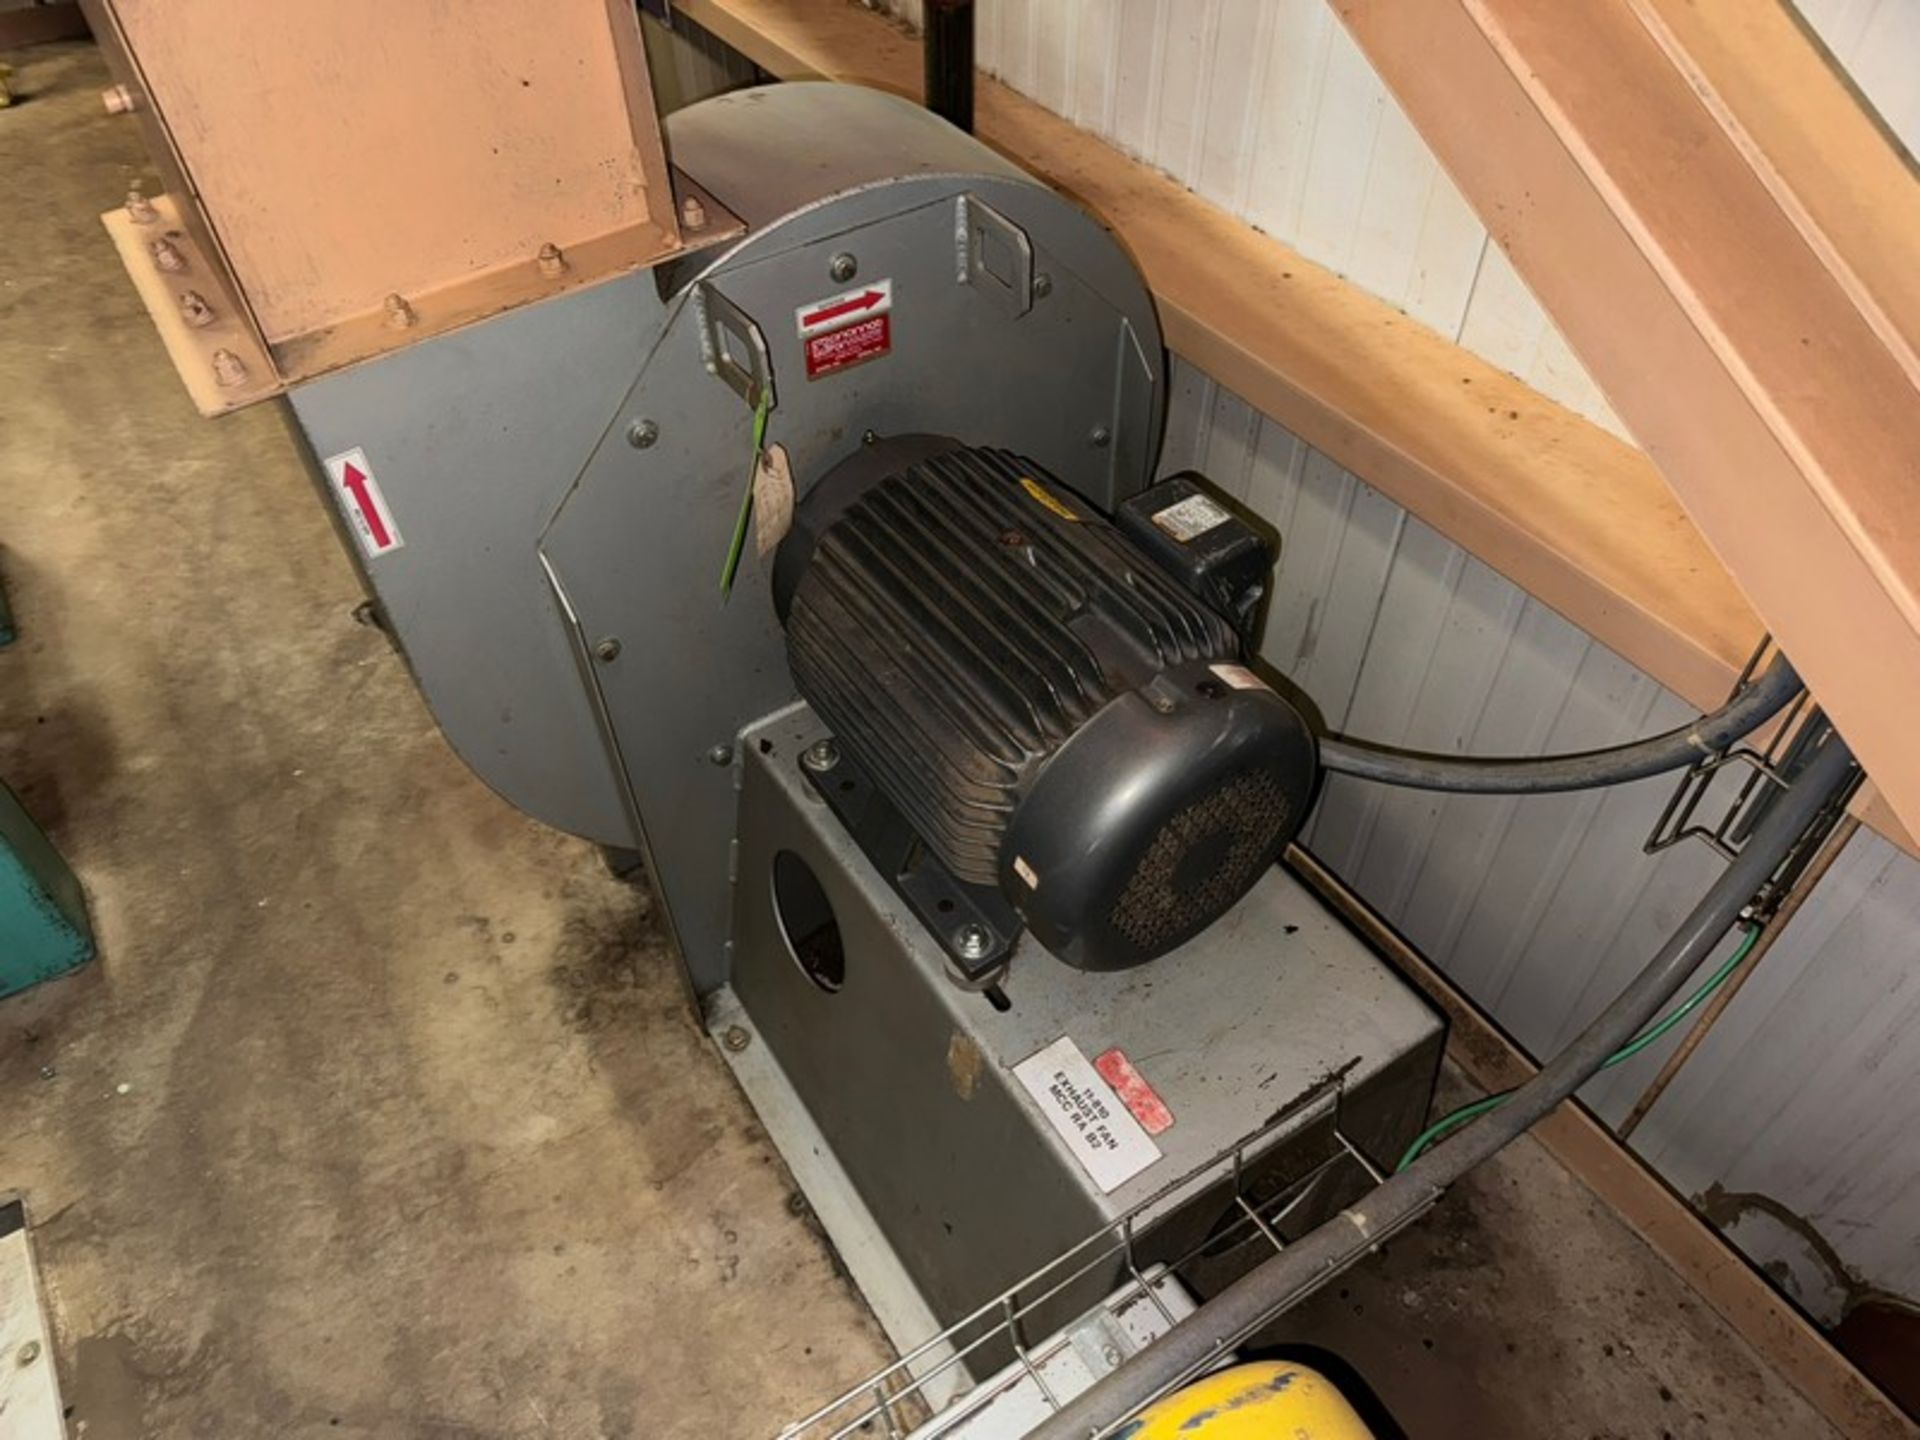 Horizon Systems Inc. South Bag House, Includes Horizon Systems Inc. Rotary Air Lock Discharge - Image 6 of 9